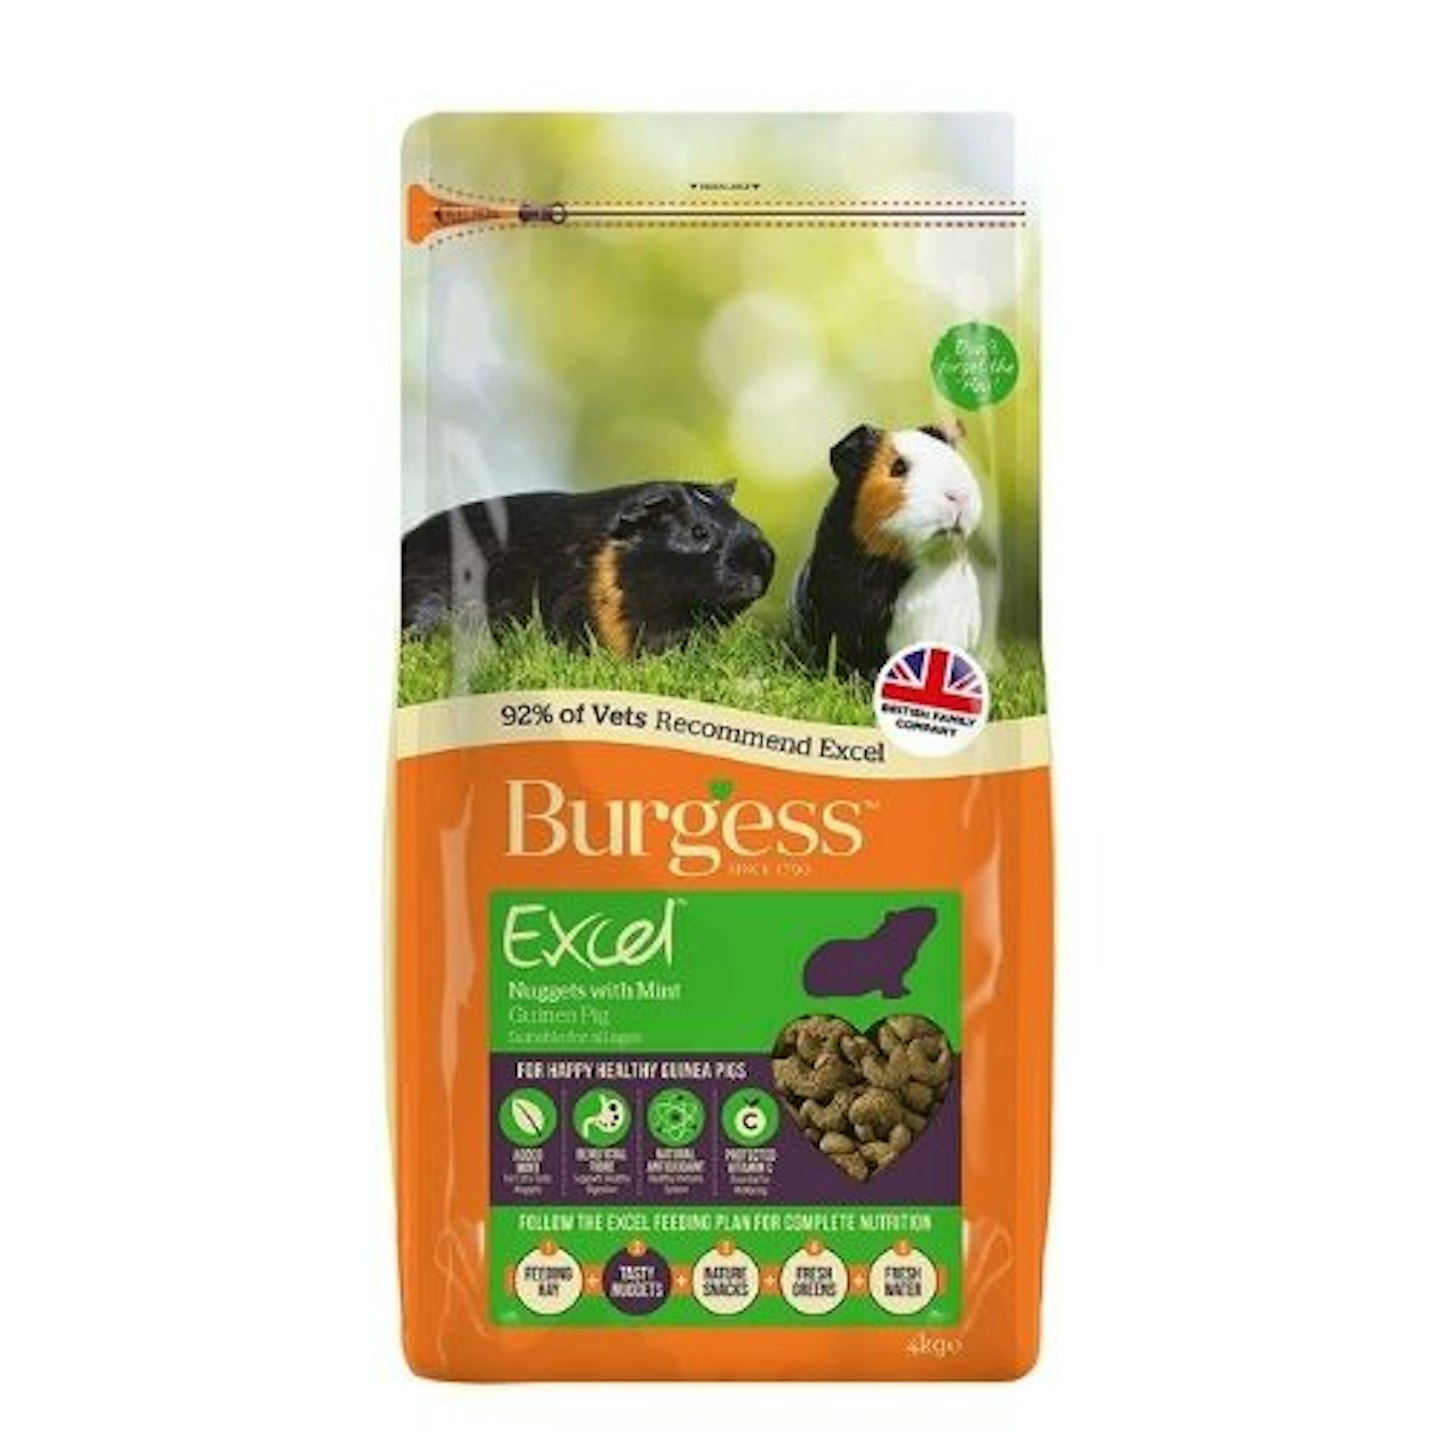 Burgess Excel Guinea Pig Nuggets with Mint (4Kg)